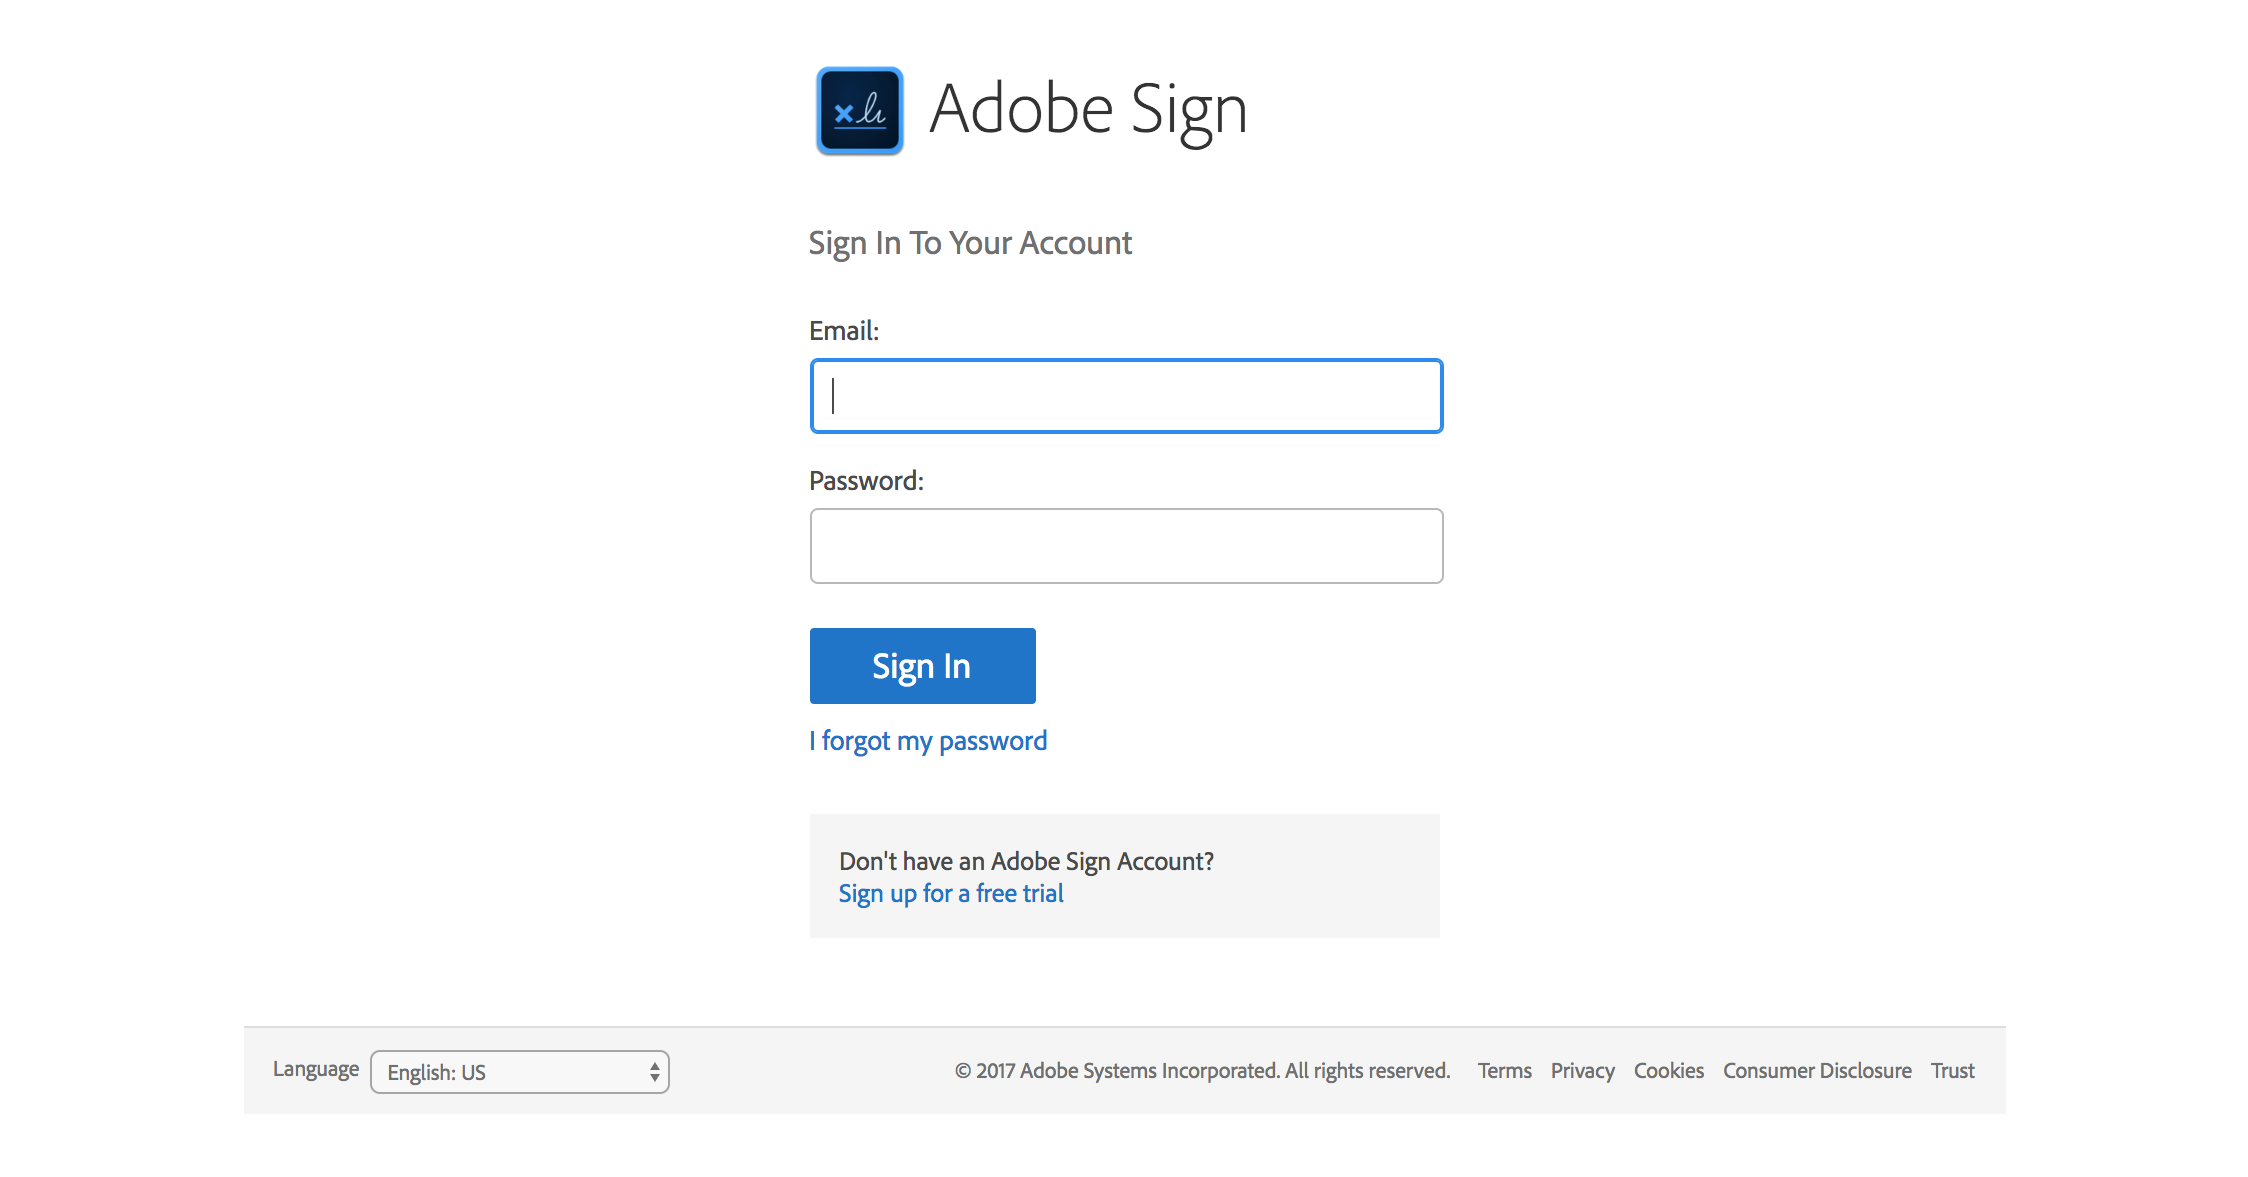 Adobe Sign sign in page.